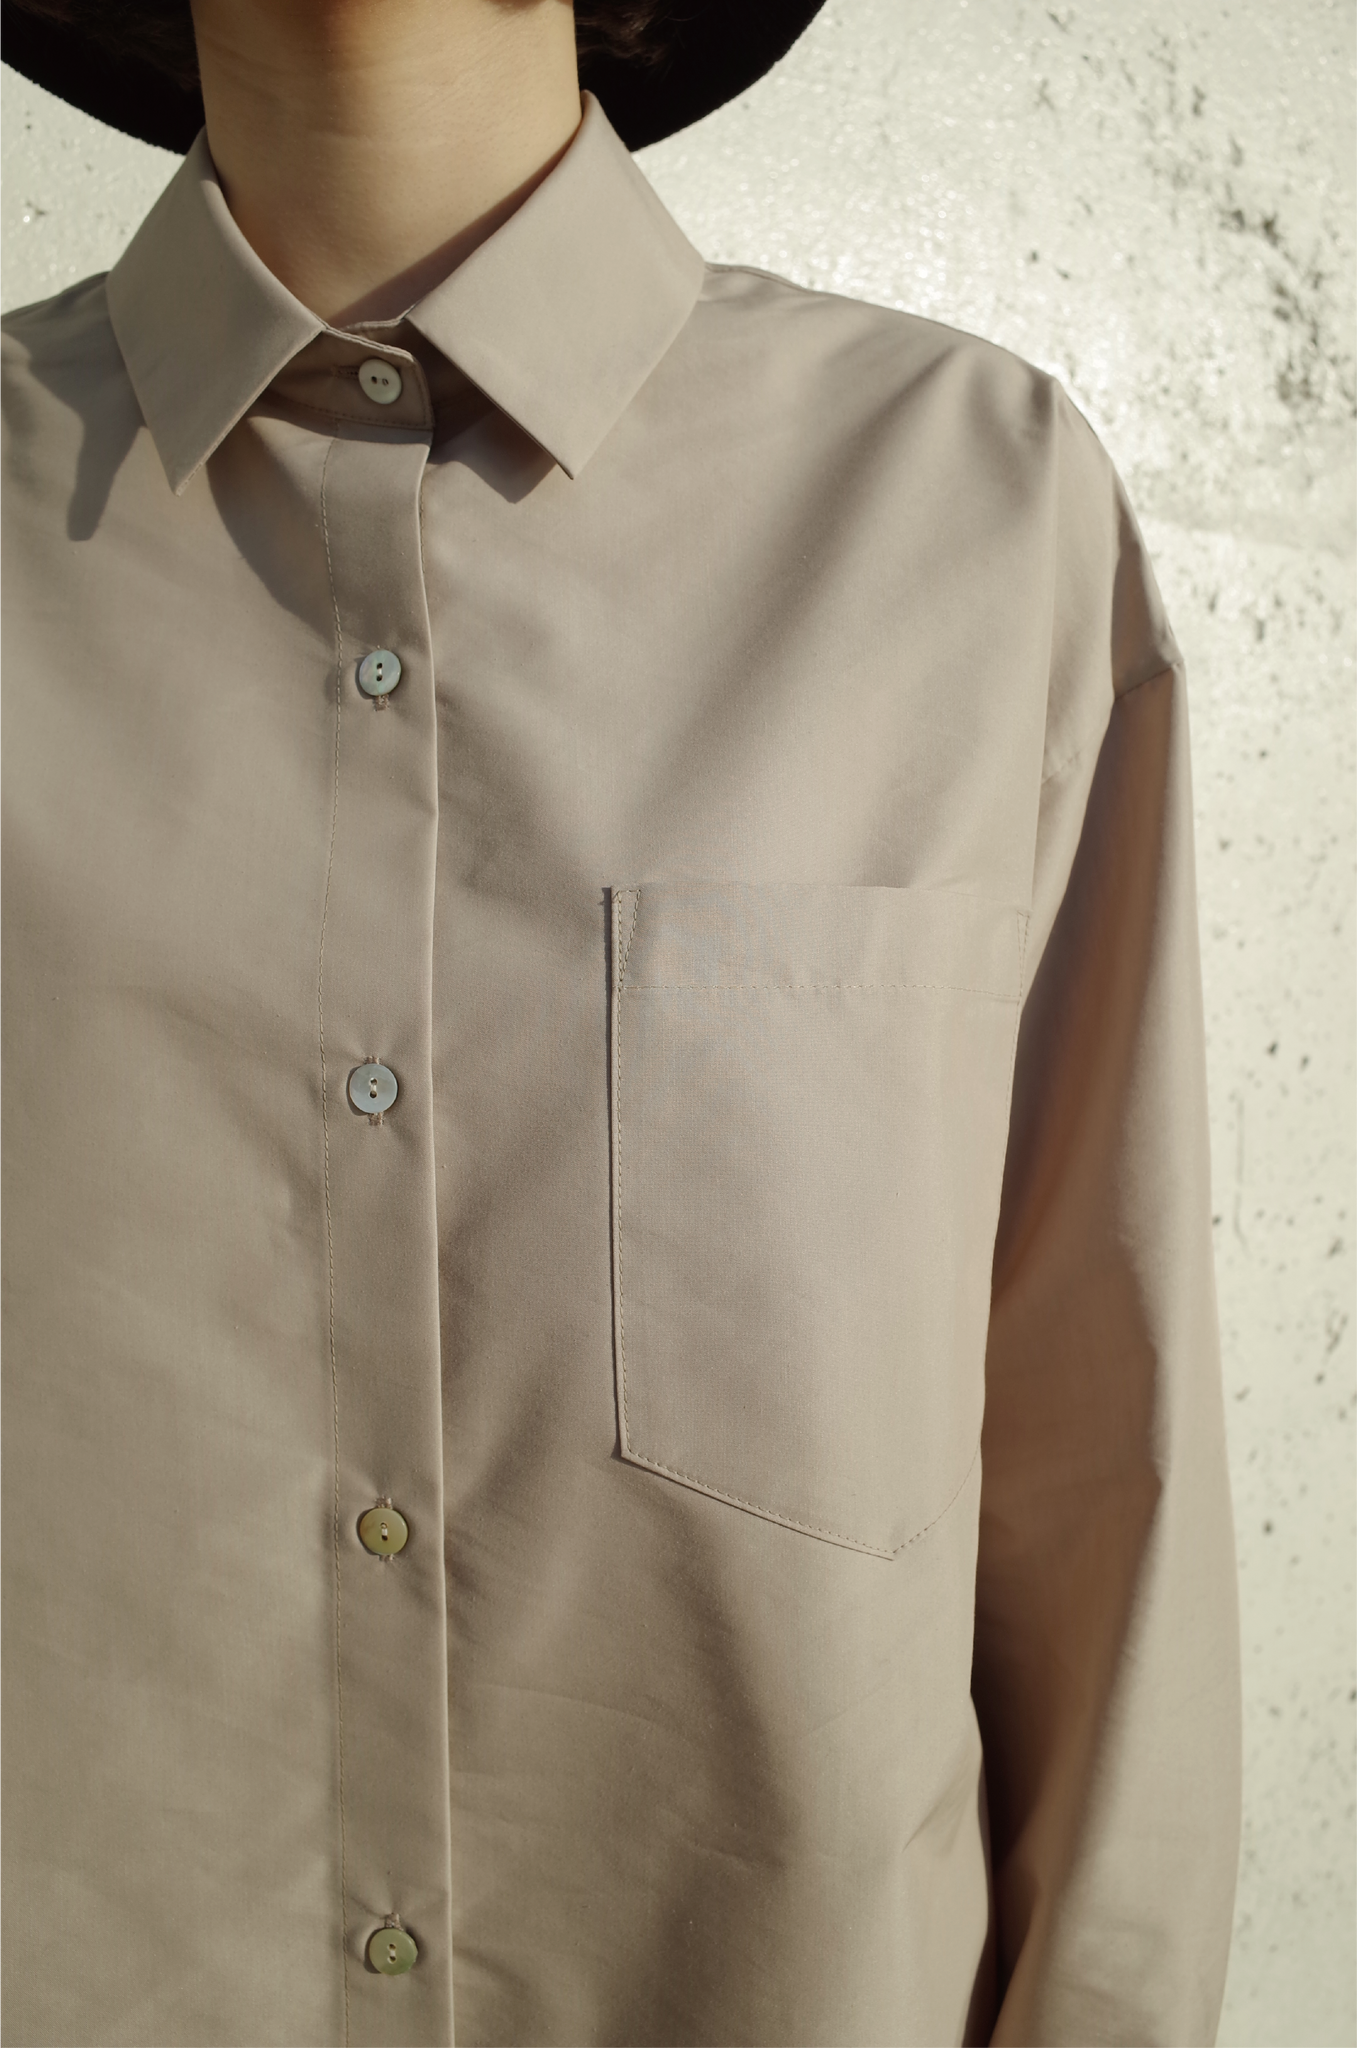 ・ Reserved items ・ Shell Button Elegant Shirt